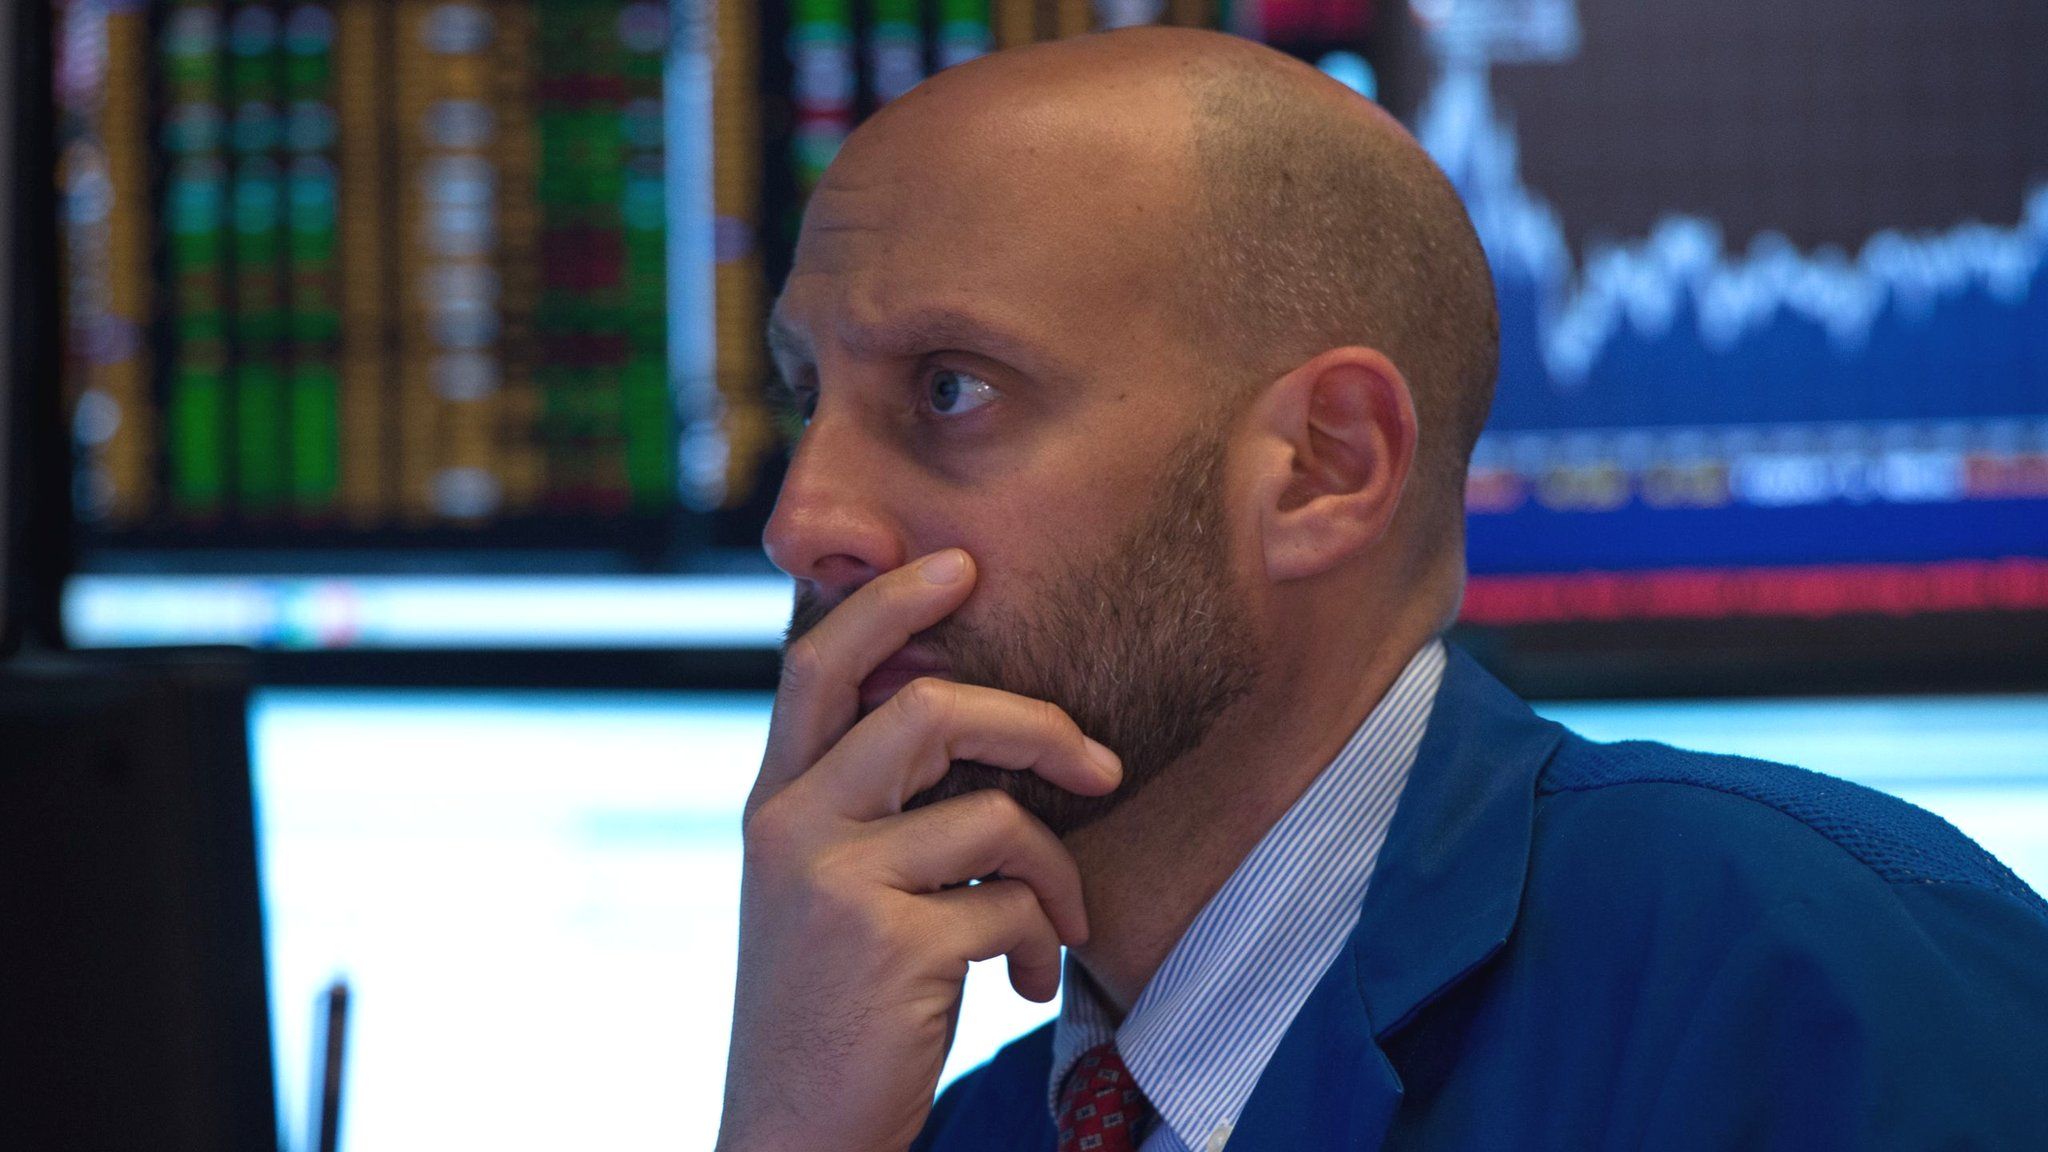 An investor looks at screens at the New York Stock exchange on 28 September 2017.